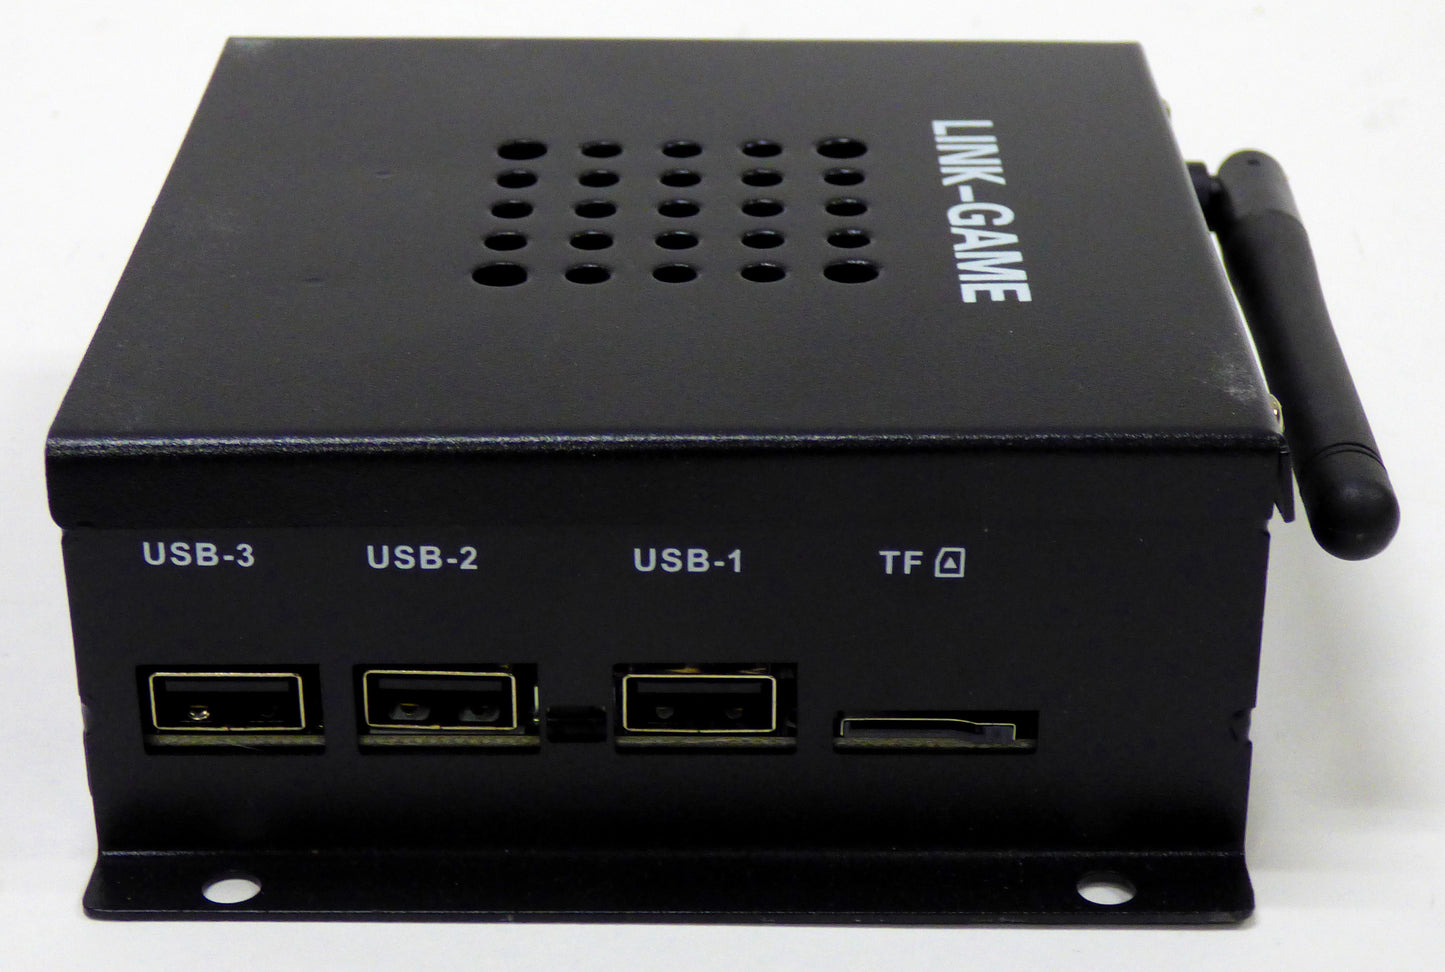 link-game video game box de-b1-1.0 side ports